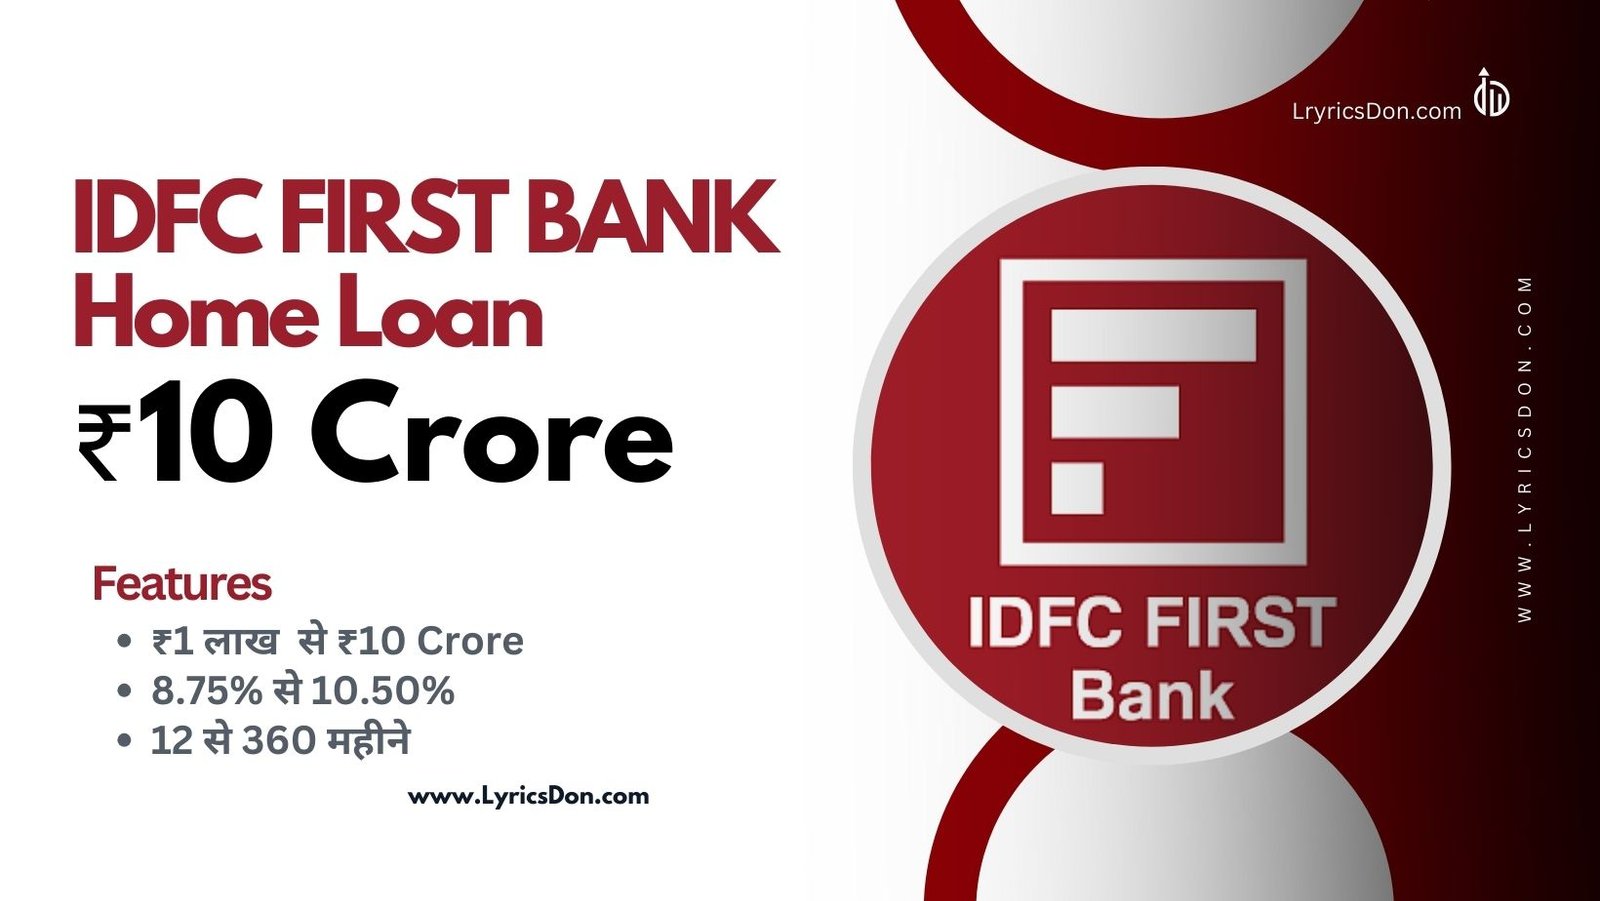 IDFC First Bank Home Loan Amount